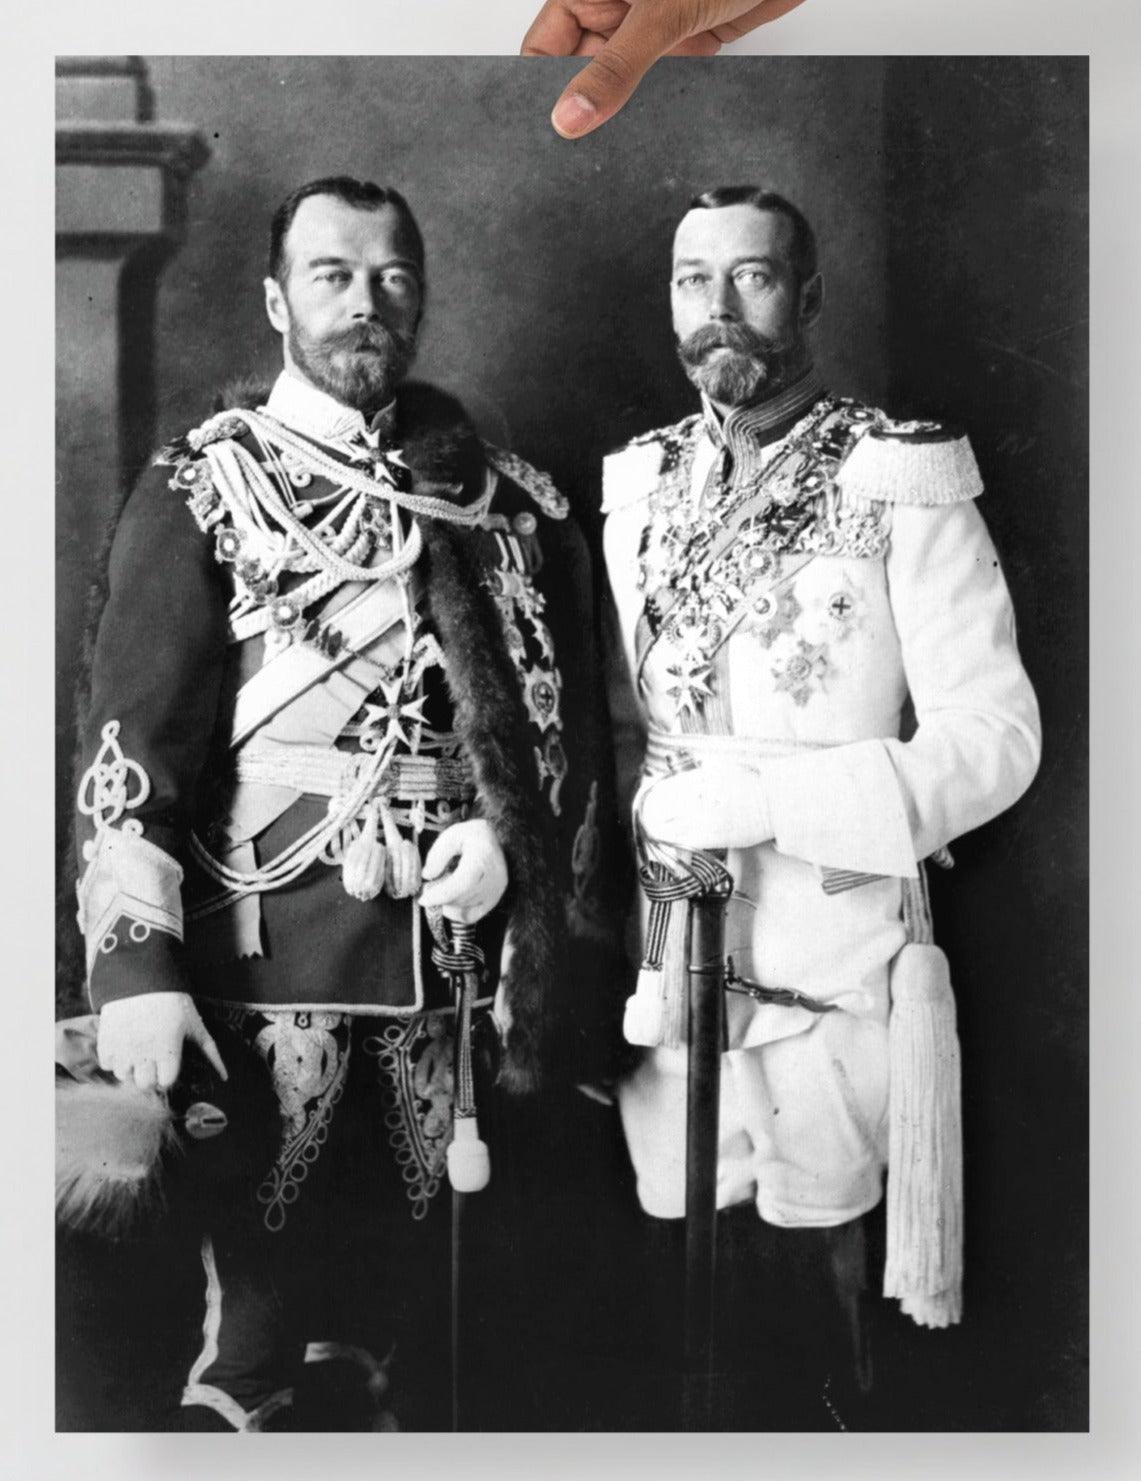 A Tsar Nicholas II & King George V  poster on a plain backdrop in size 18x24”.